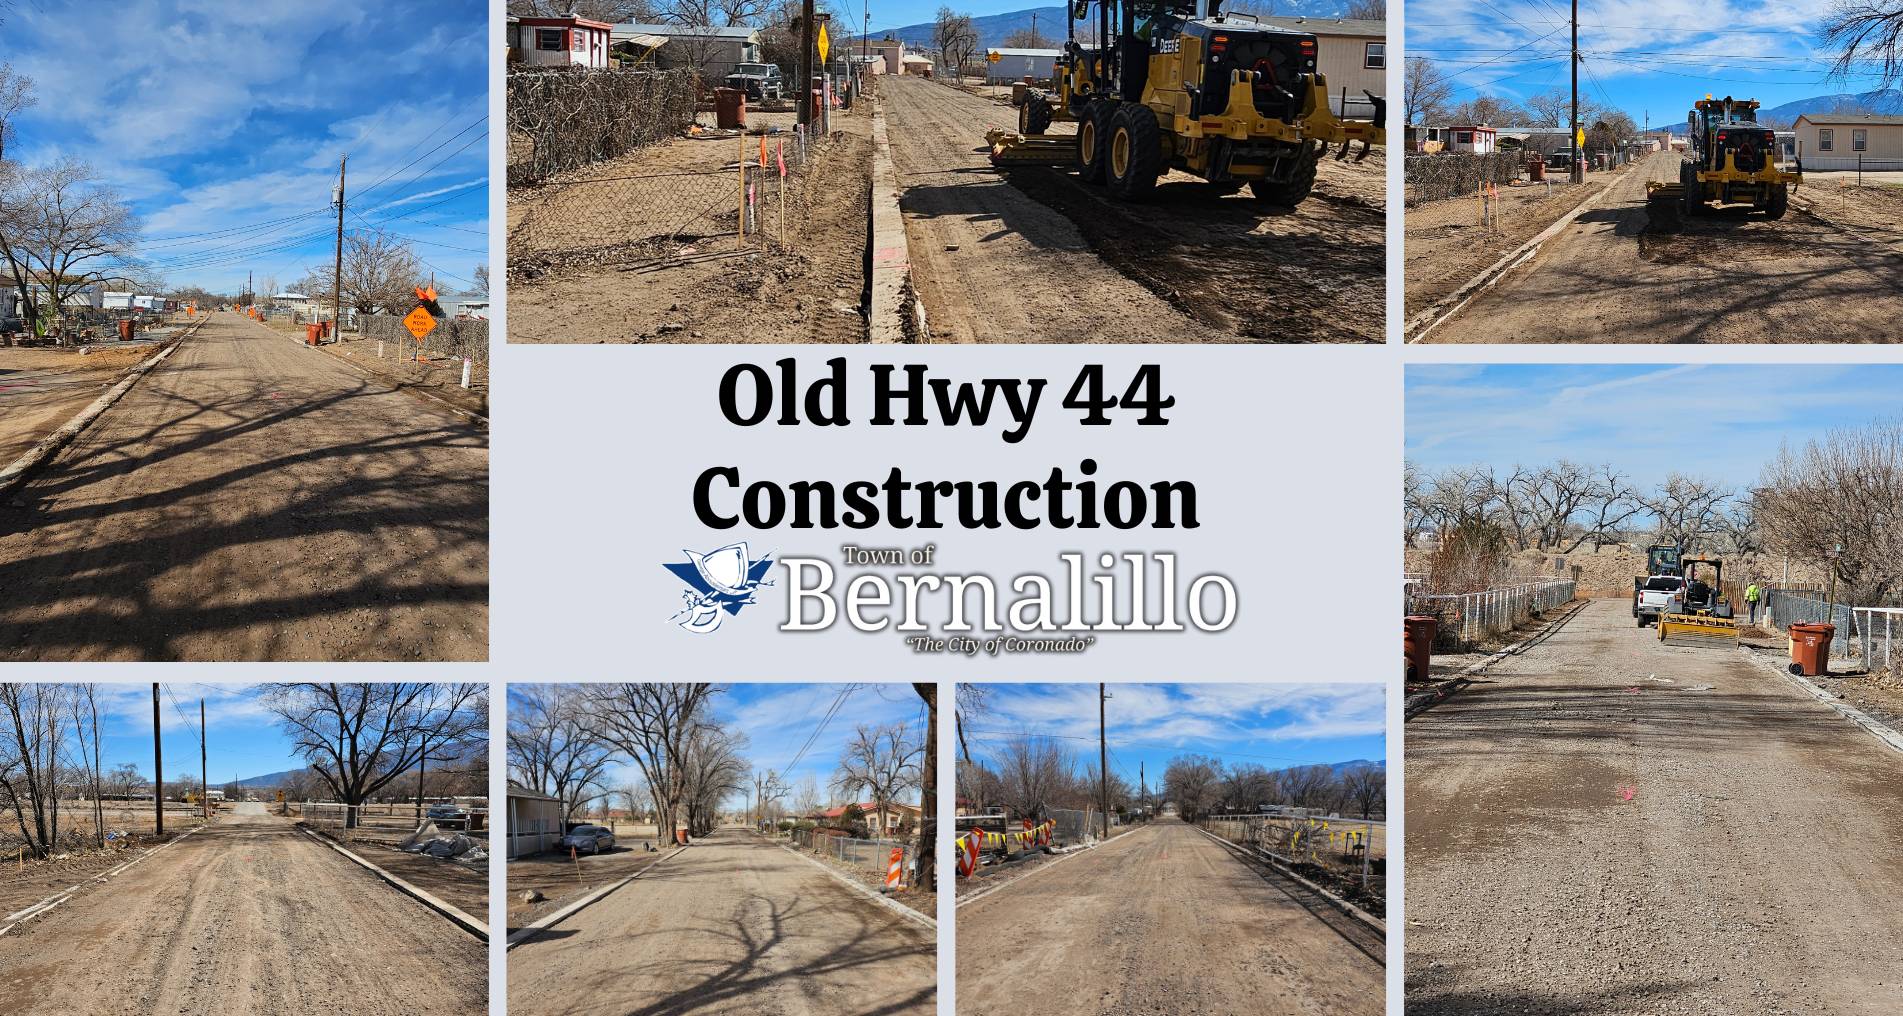 Old Hwy 44 Construction - Copy